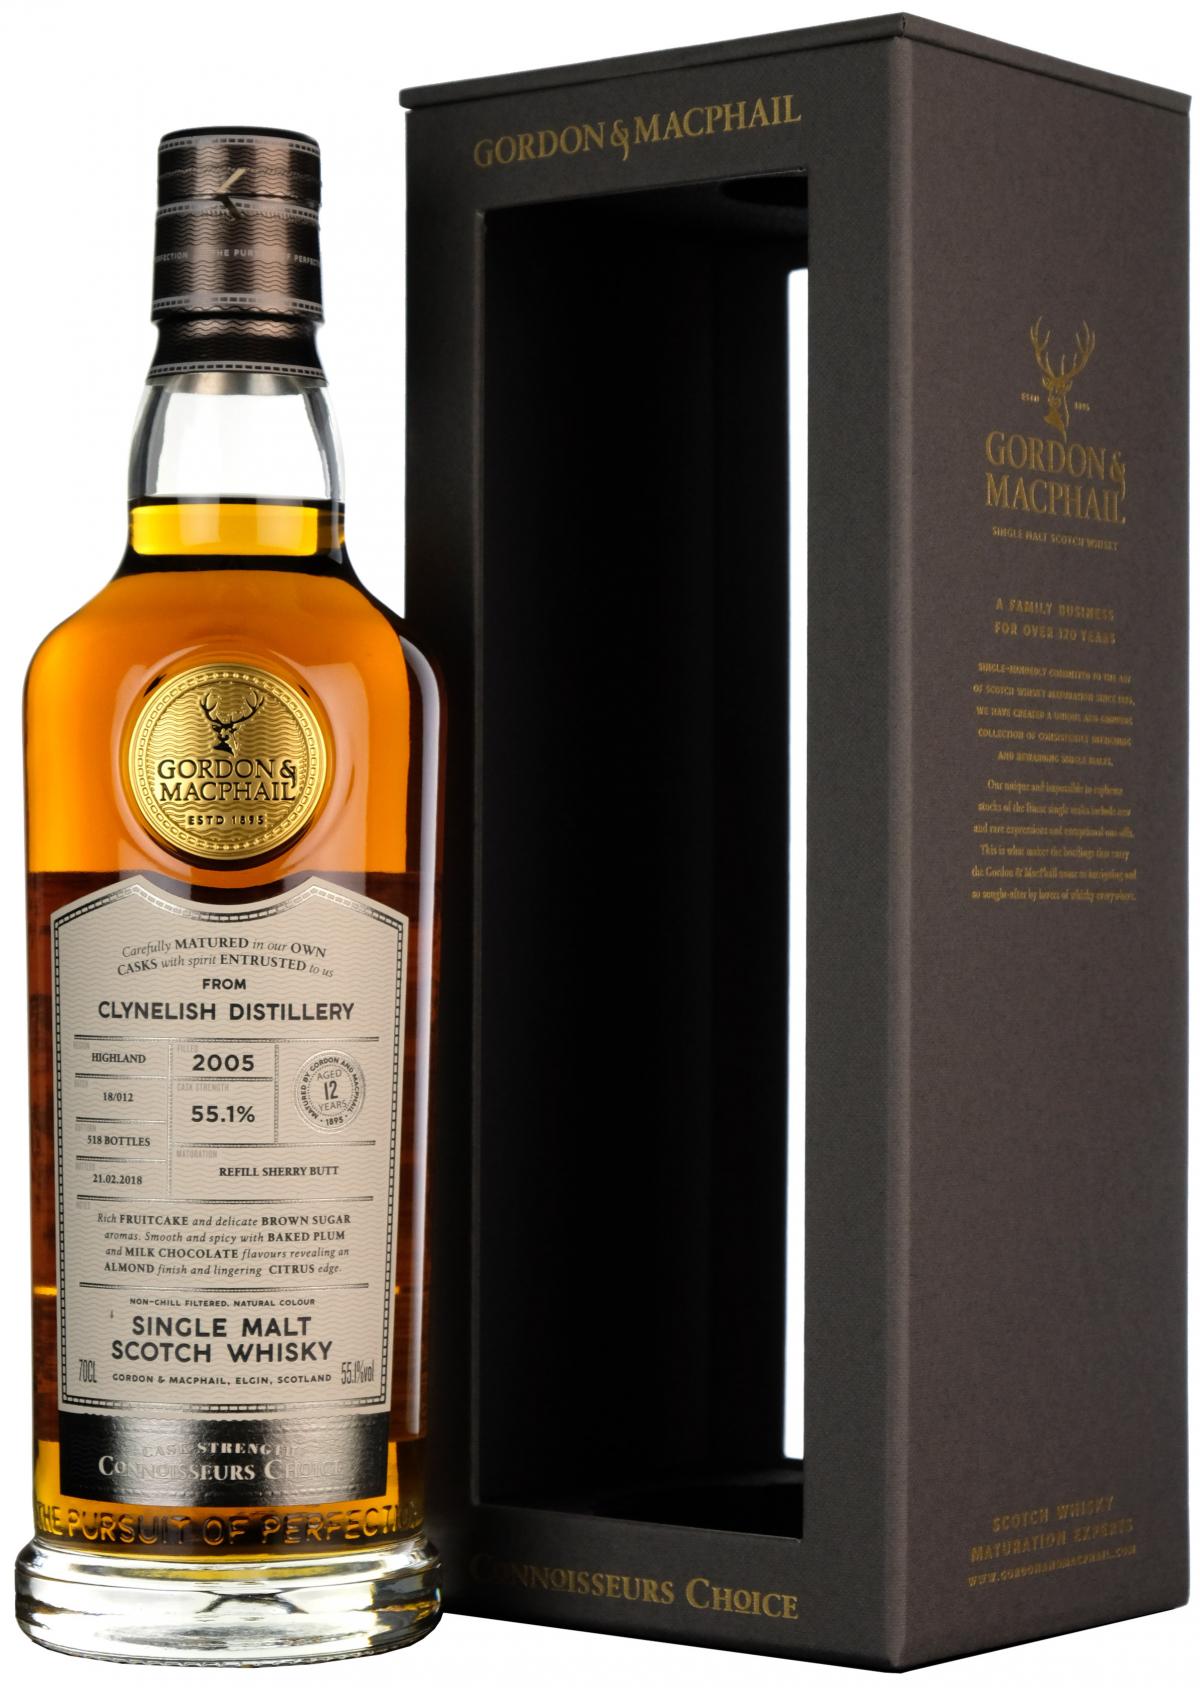 clynelish 2005, 12 year old, connoisseurs choice, cask strength, gordon and macphail whisky,